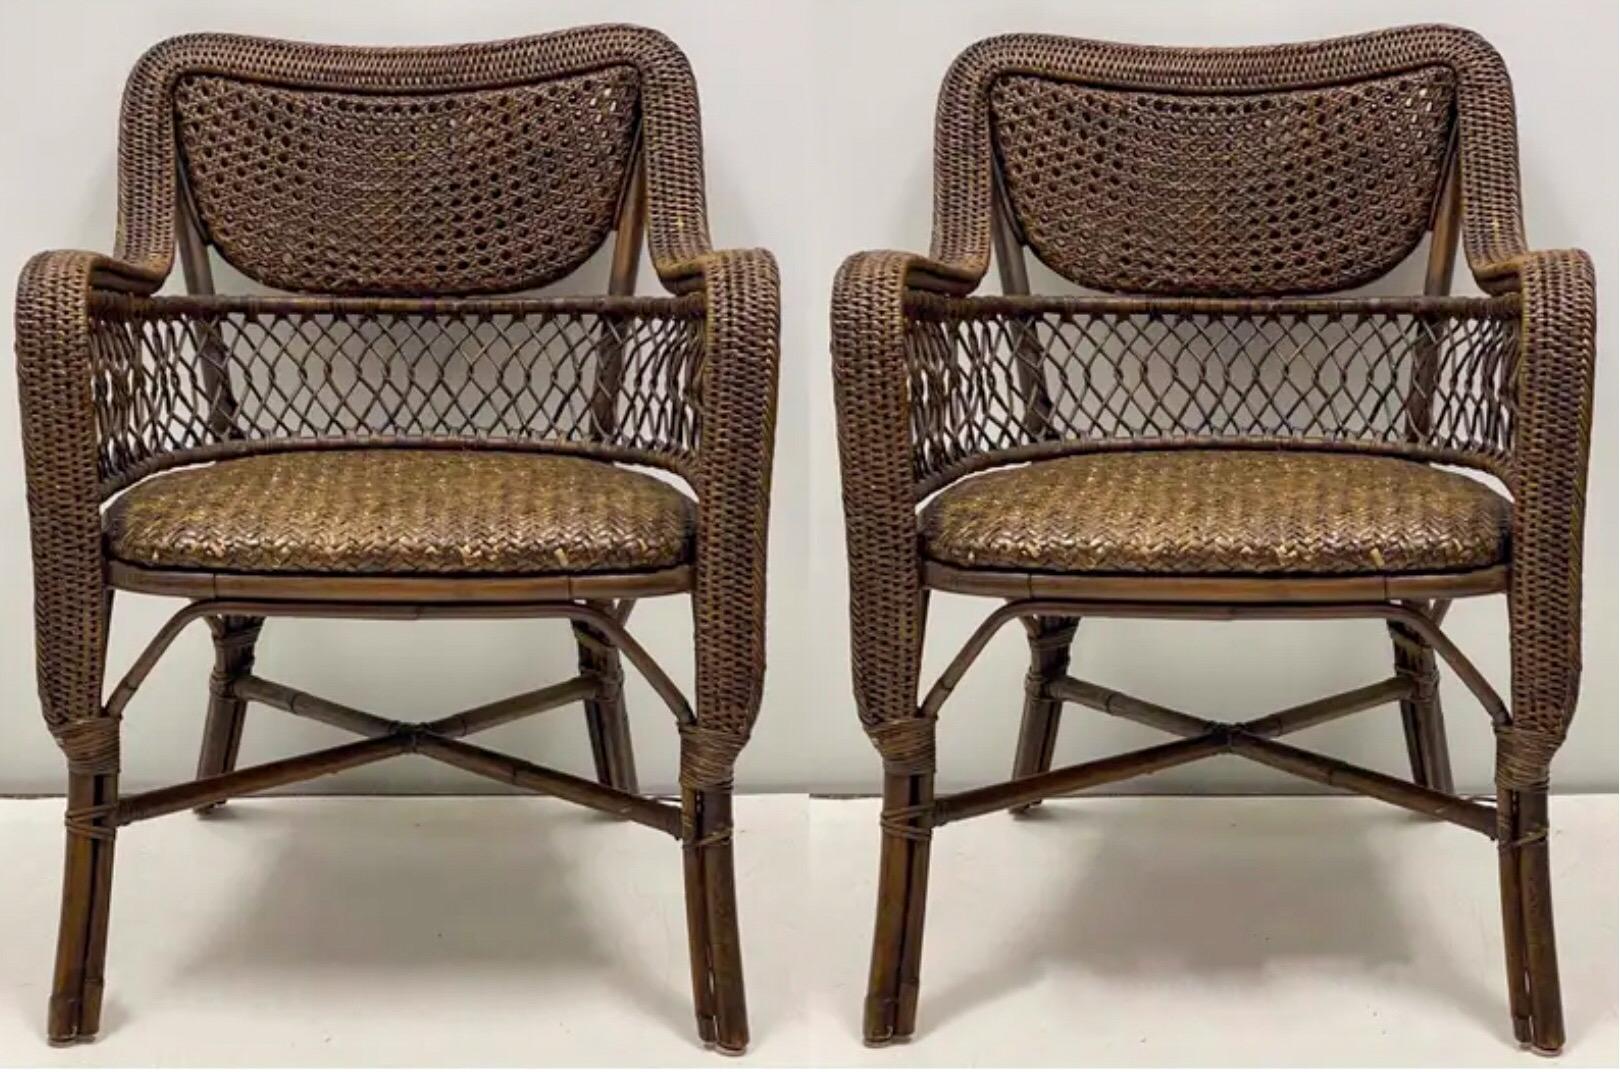 Late 20th Century 1980s British Colonial Style Wicker & Caned Chairs by Palecek, Pair